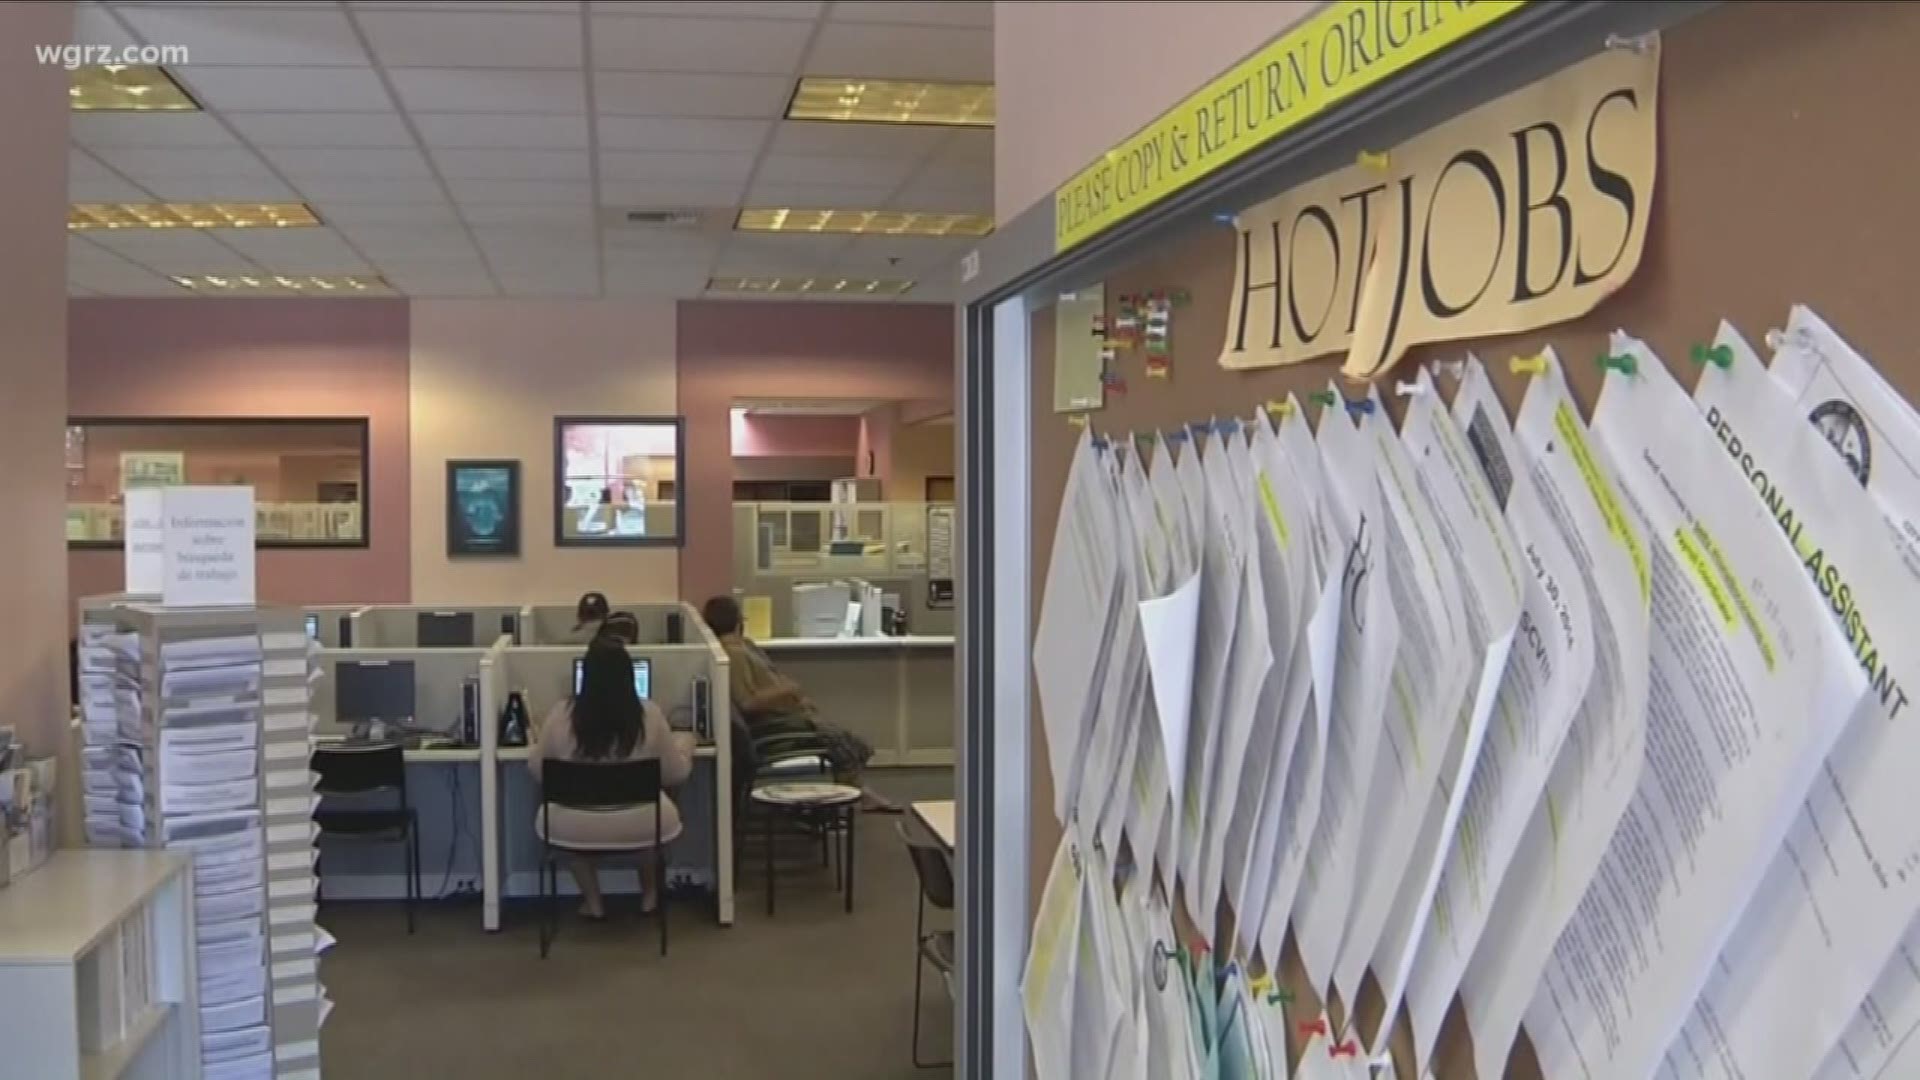 State labor department says it has been dealing with an unprecedented amount of calls.
That's why they set up a new filing system for people claiming unemployment.